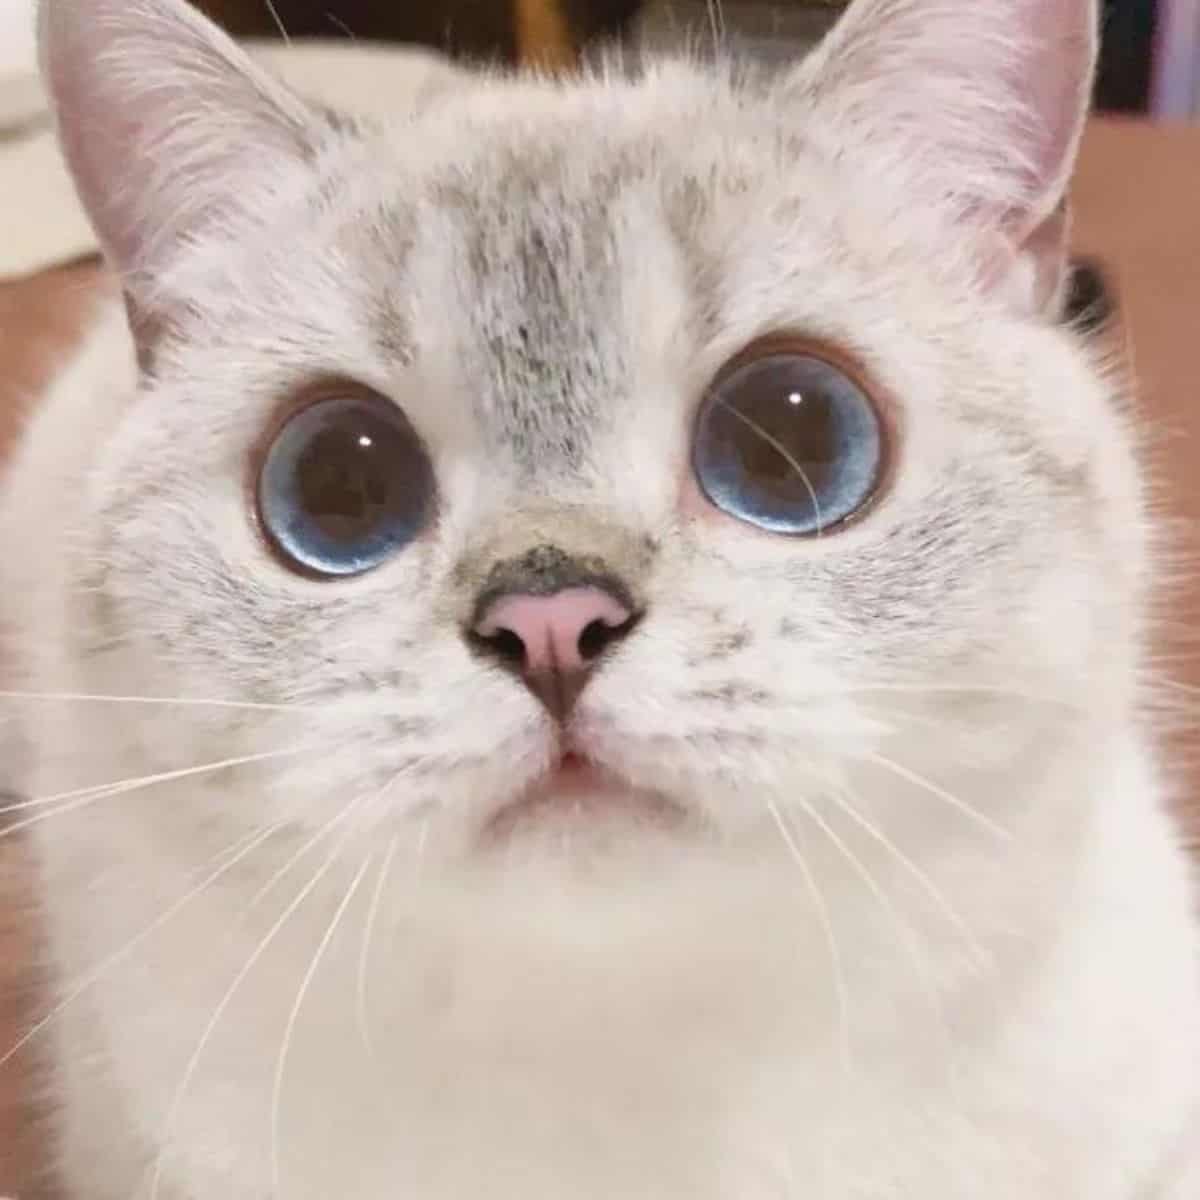 the cat calmly looks closely at the camera